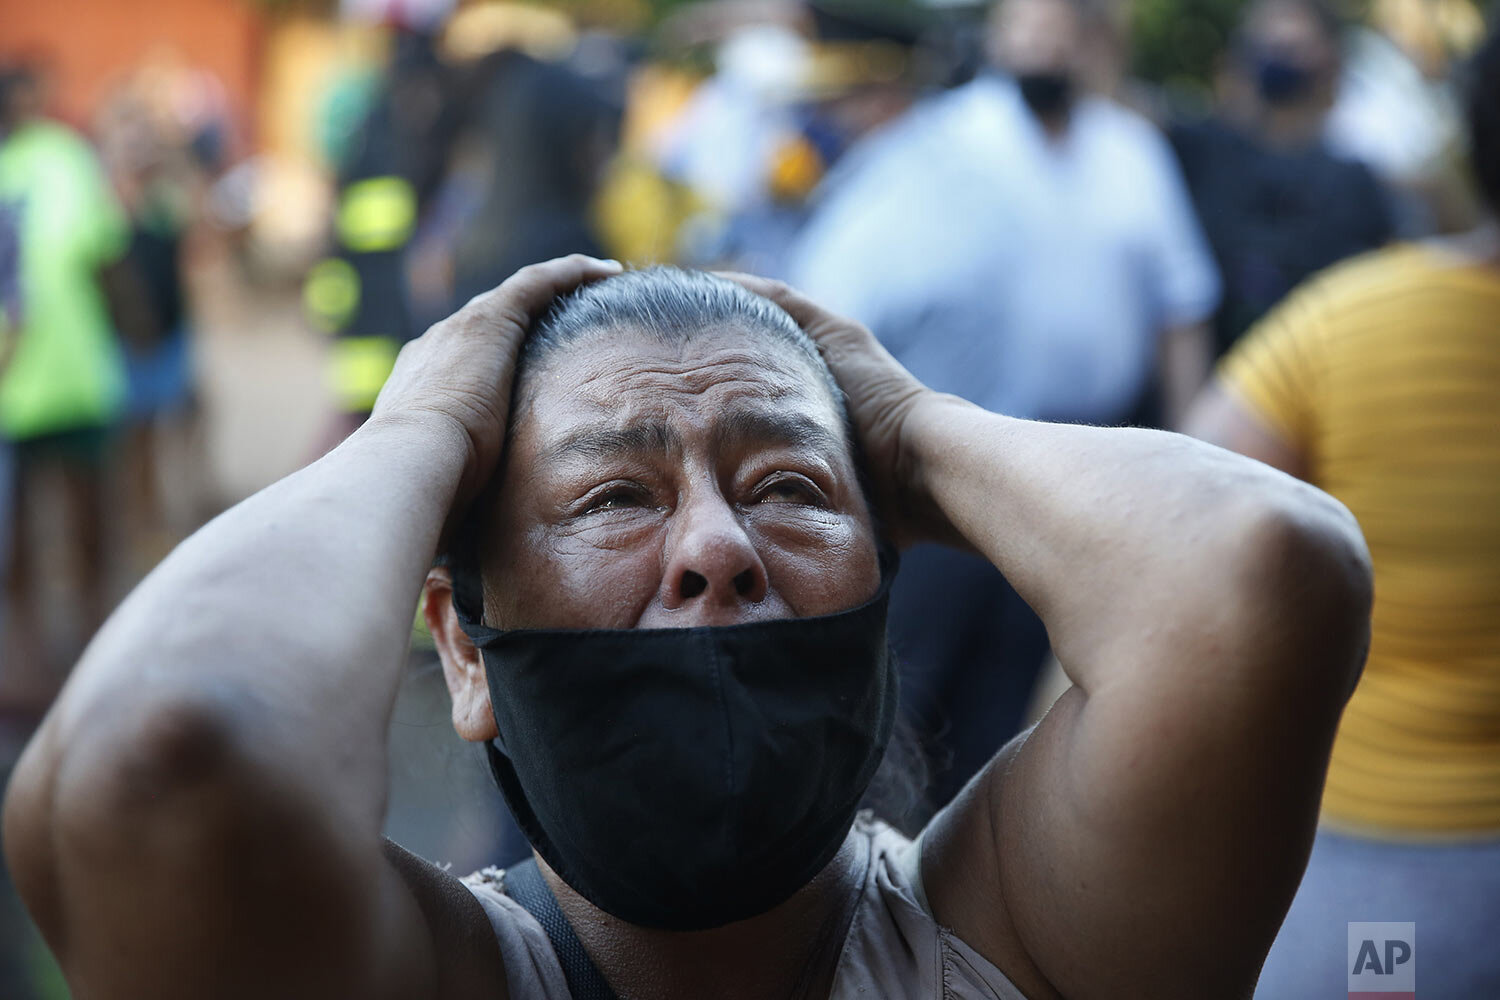  The mother of an inmate cries outside the Tacumbu jail after a prison riot in Asuncion, Paraguay, Feb. 16, 2021. (AP Photo/Jorge Saenz) 